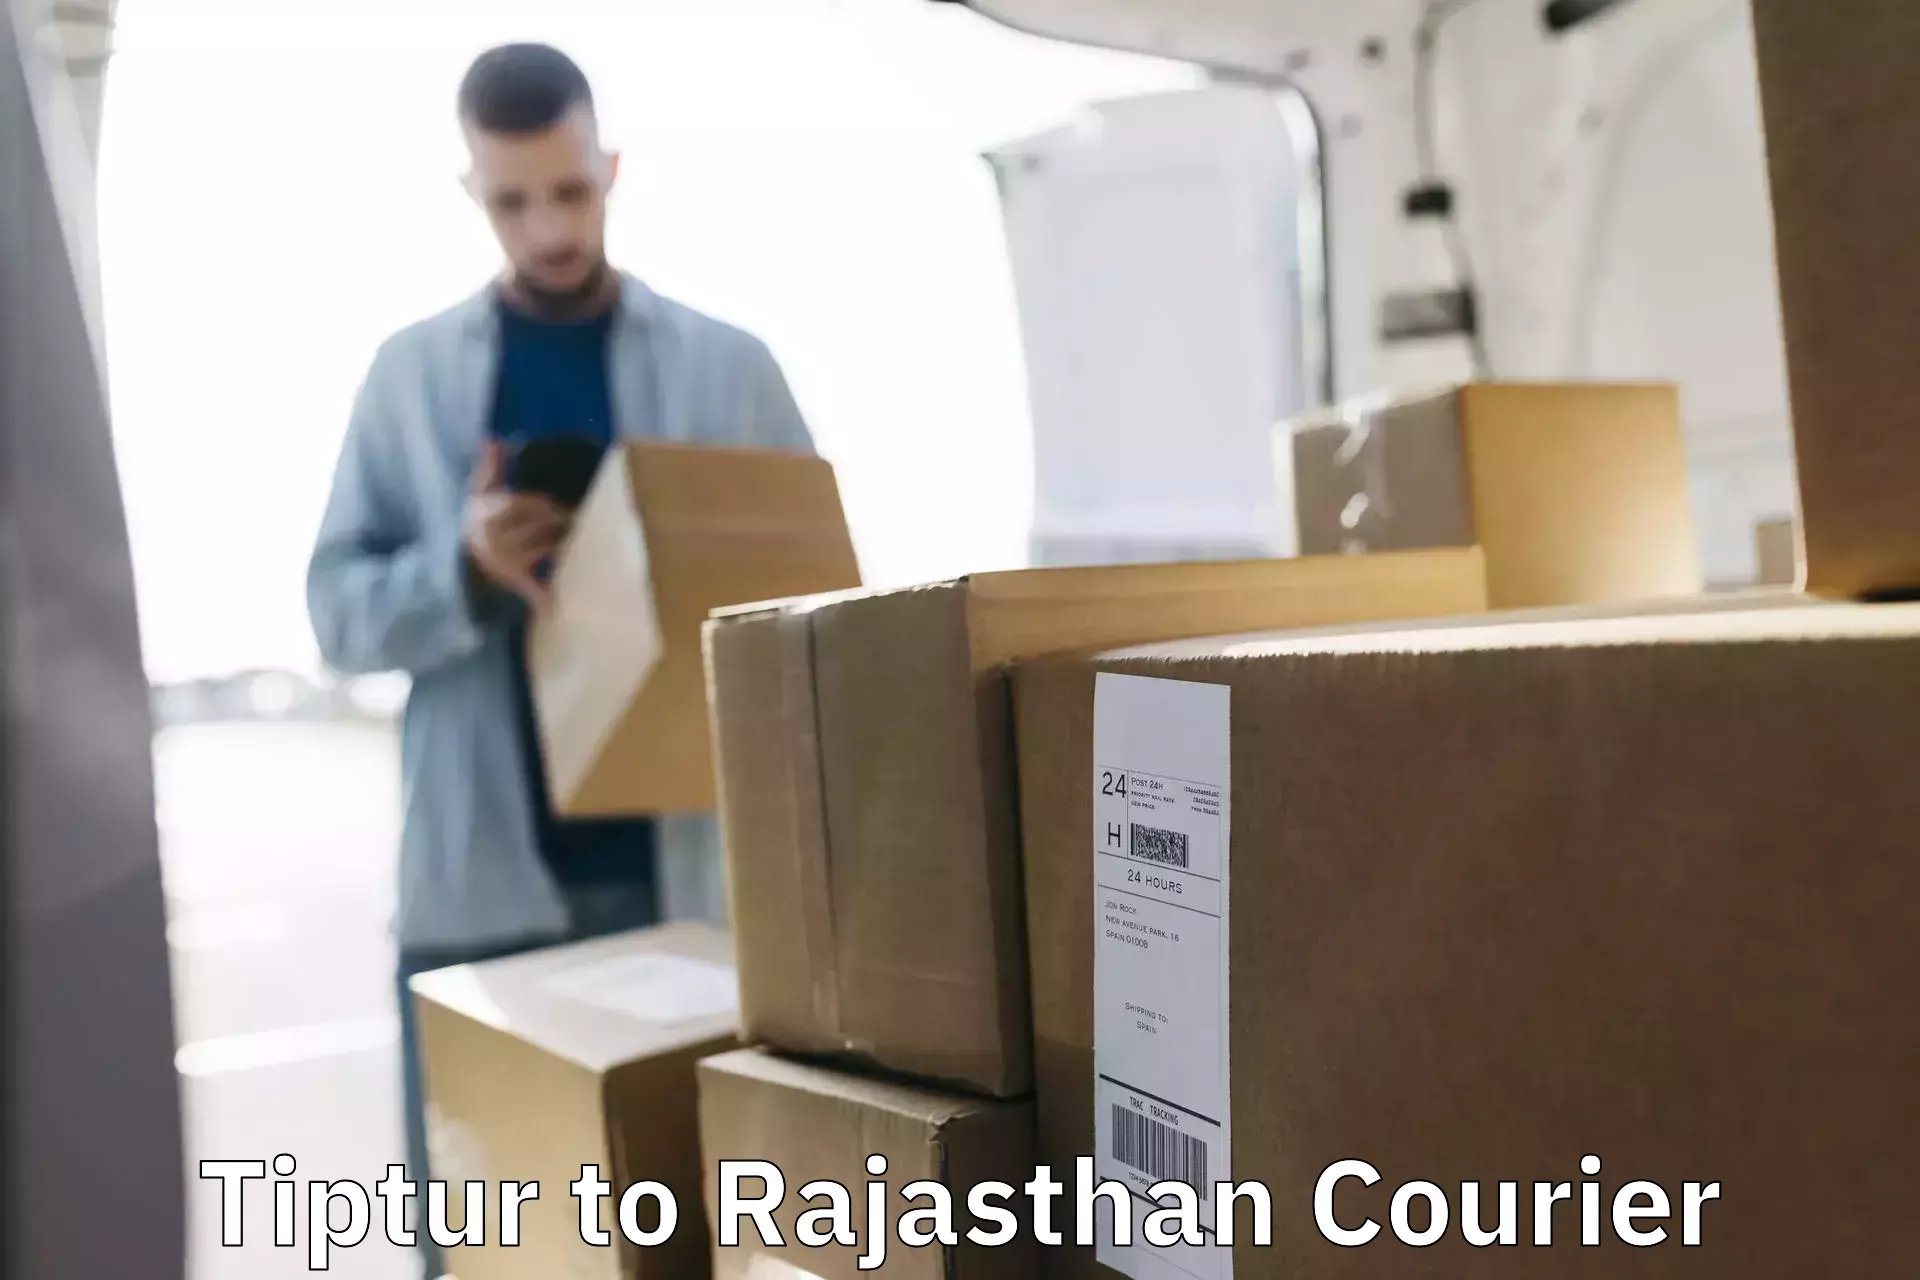 International courier networks Tiptur to Rajasthan